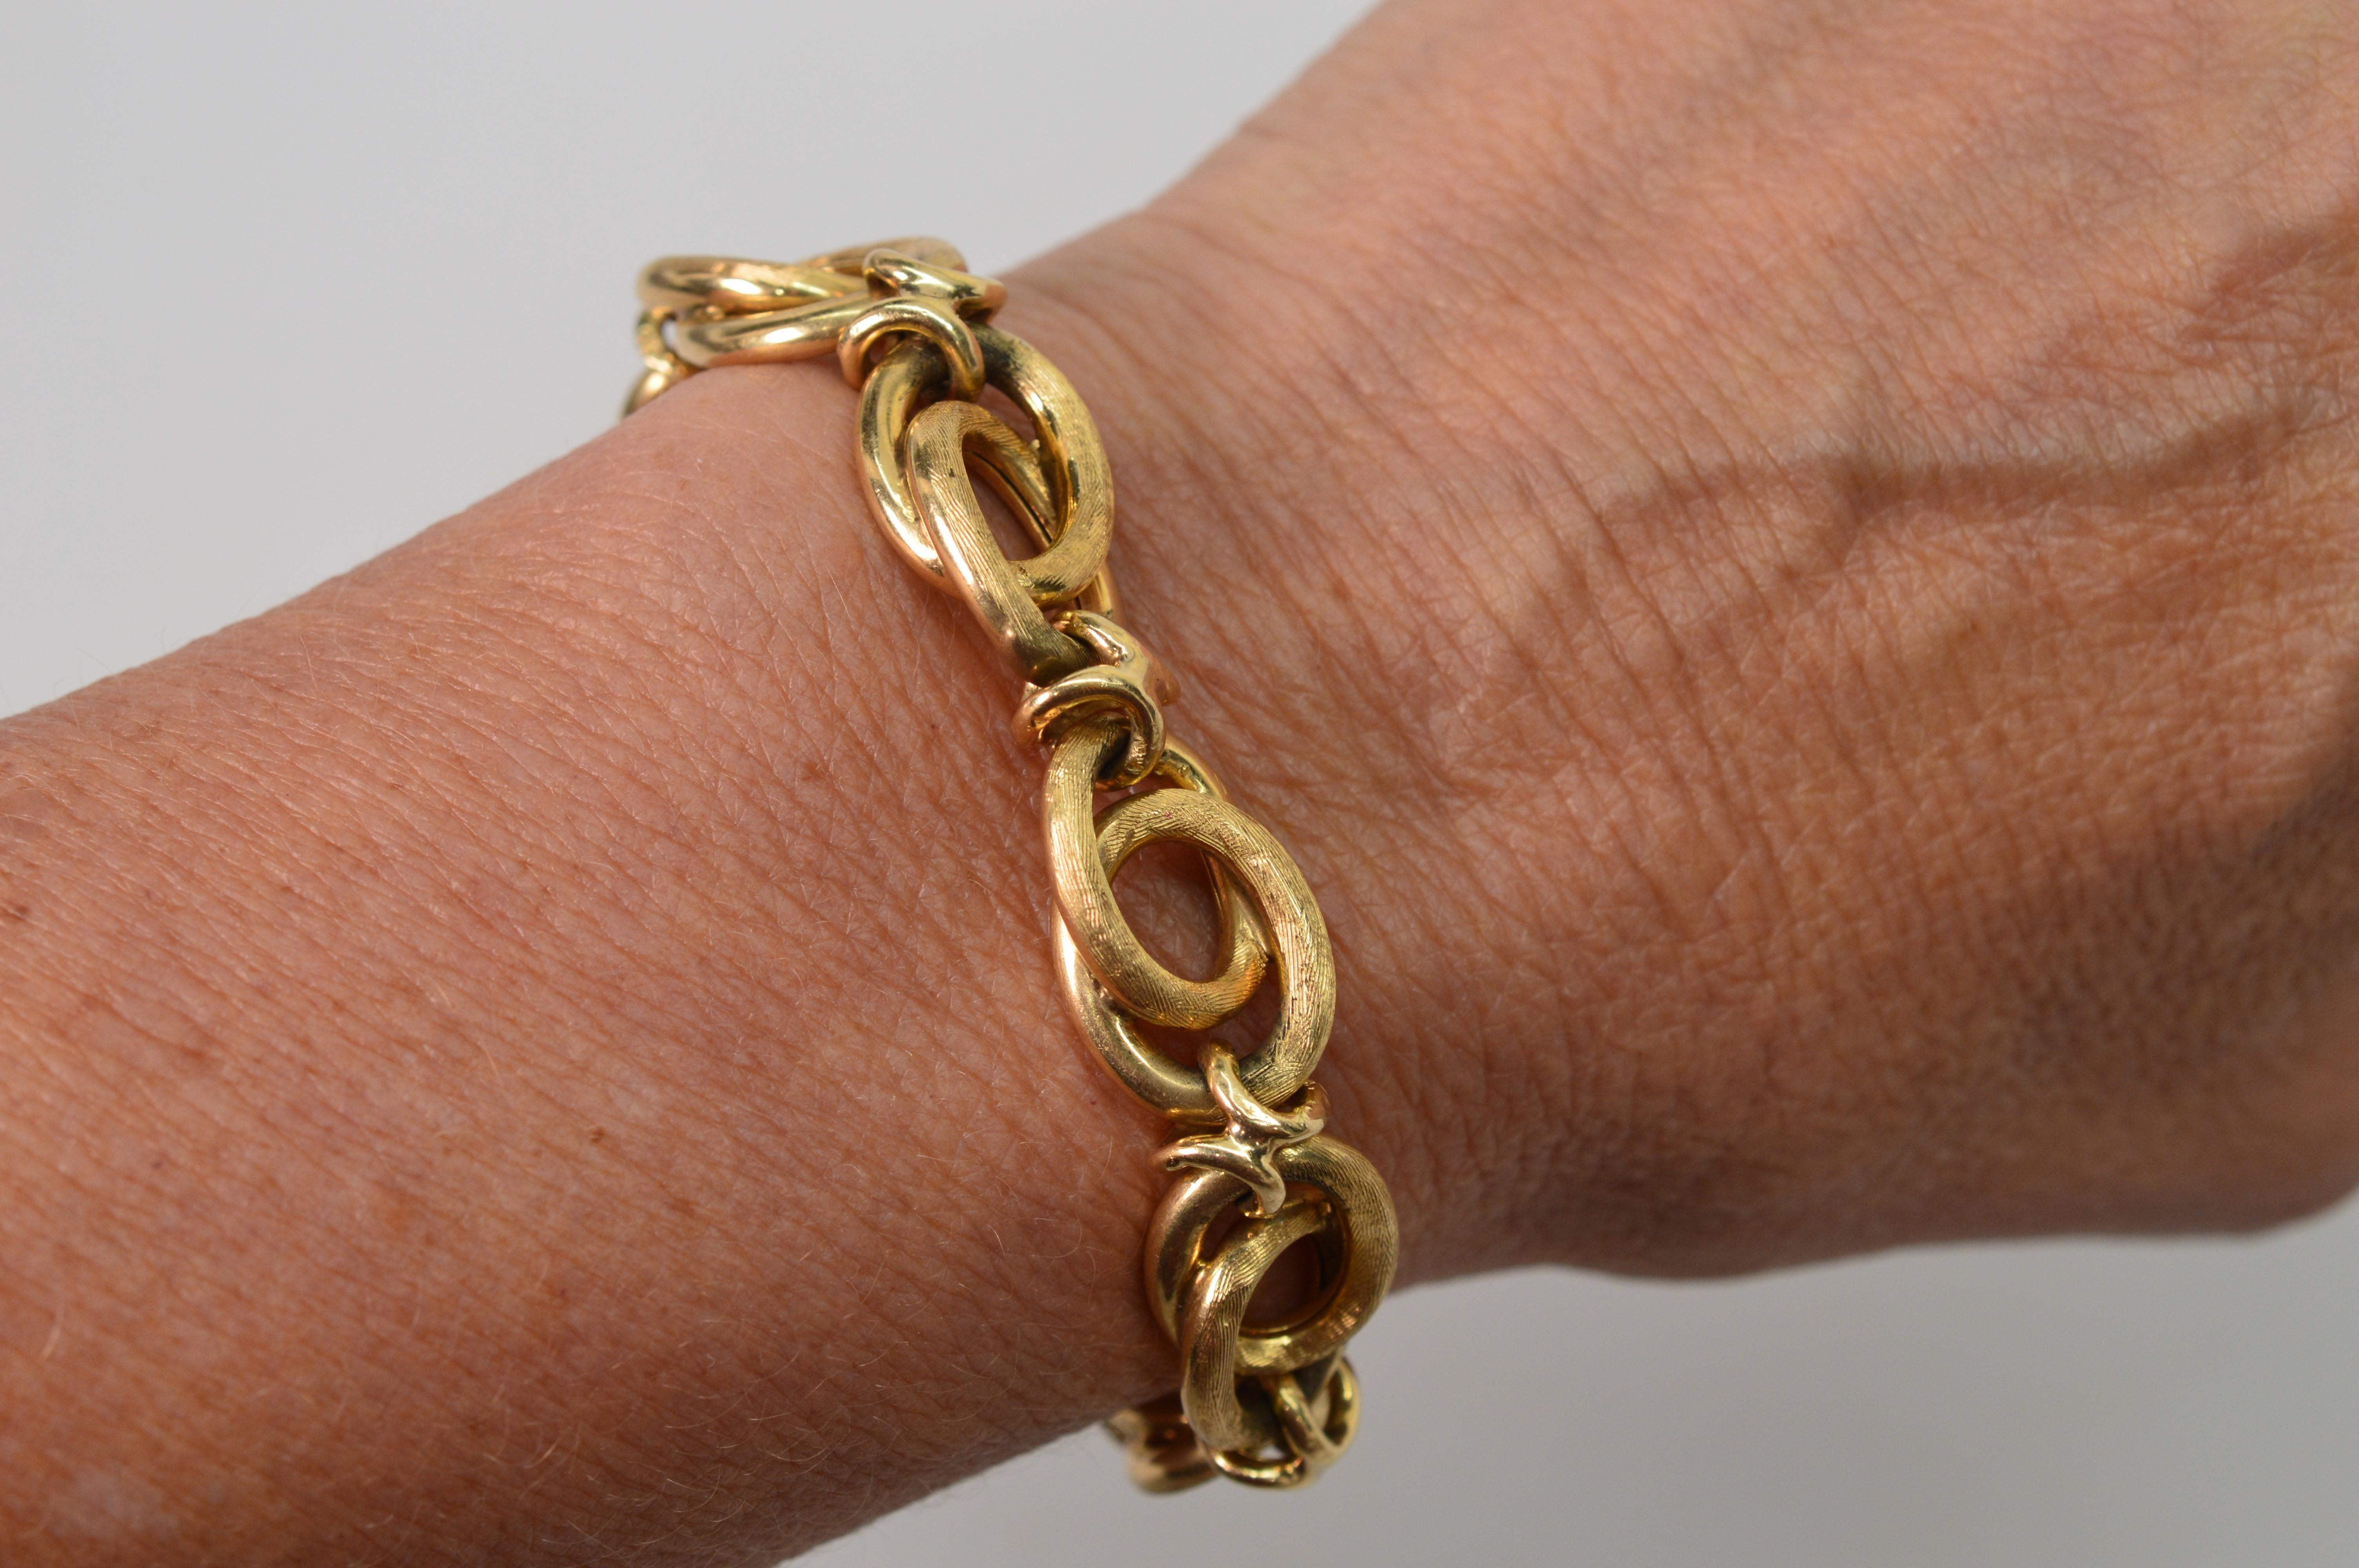 A mix of textured and smooth finishes create interest on this versatile 1950's bracelet of generous oval fourteen karat yellow gold. Outfitted with slide closure and safety clasp this fancy 7-3/4 inch bracelet has an inside circumference of 7-1/4